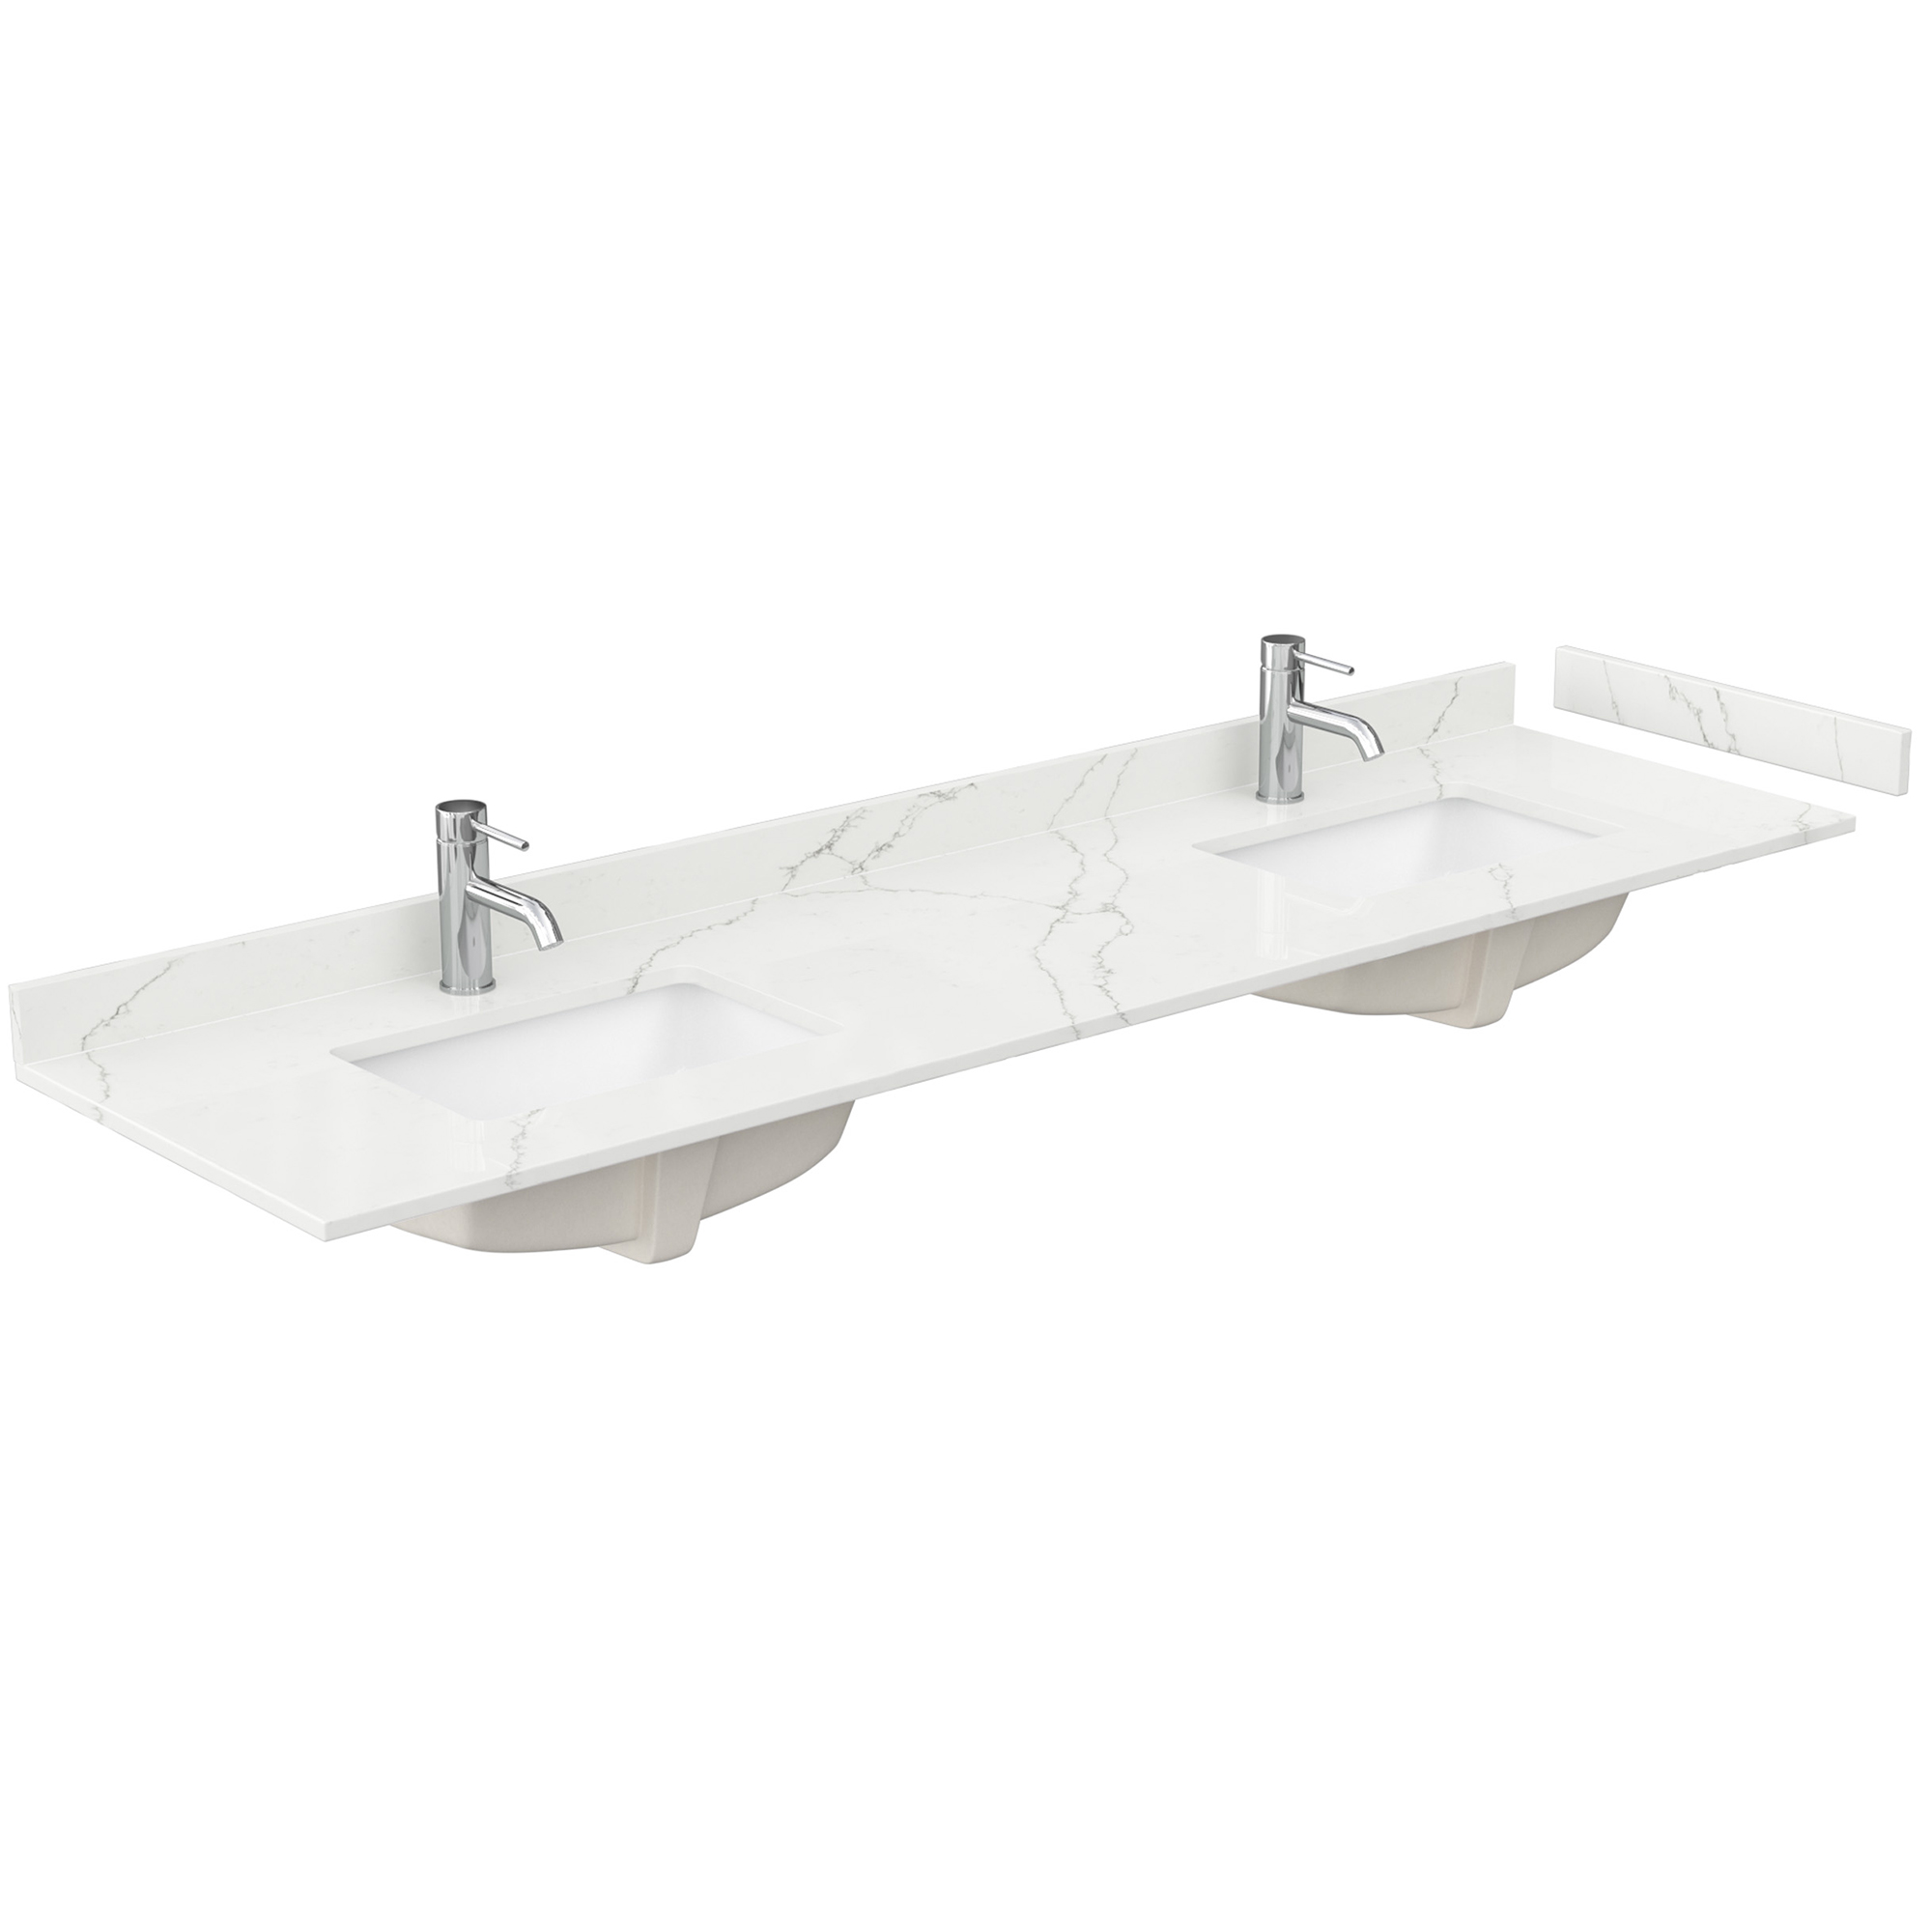 80" Double Countertop - Giotto Quartz (8066) with Undermount Square Sinks (1-Hole) - Includes Backsplash and Sidesplash WCFQC180DTOPUNSGT